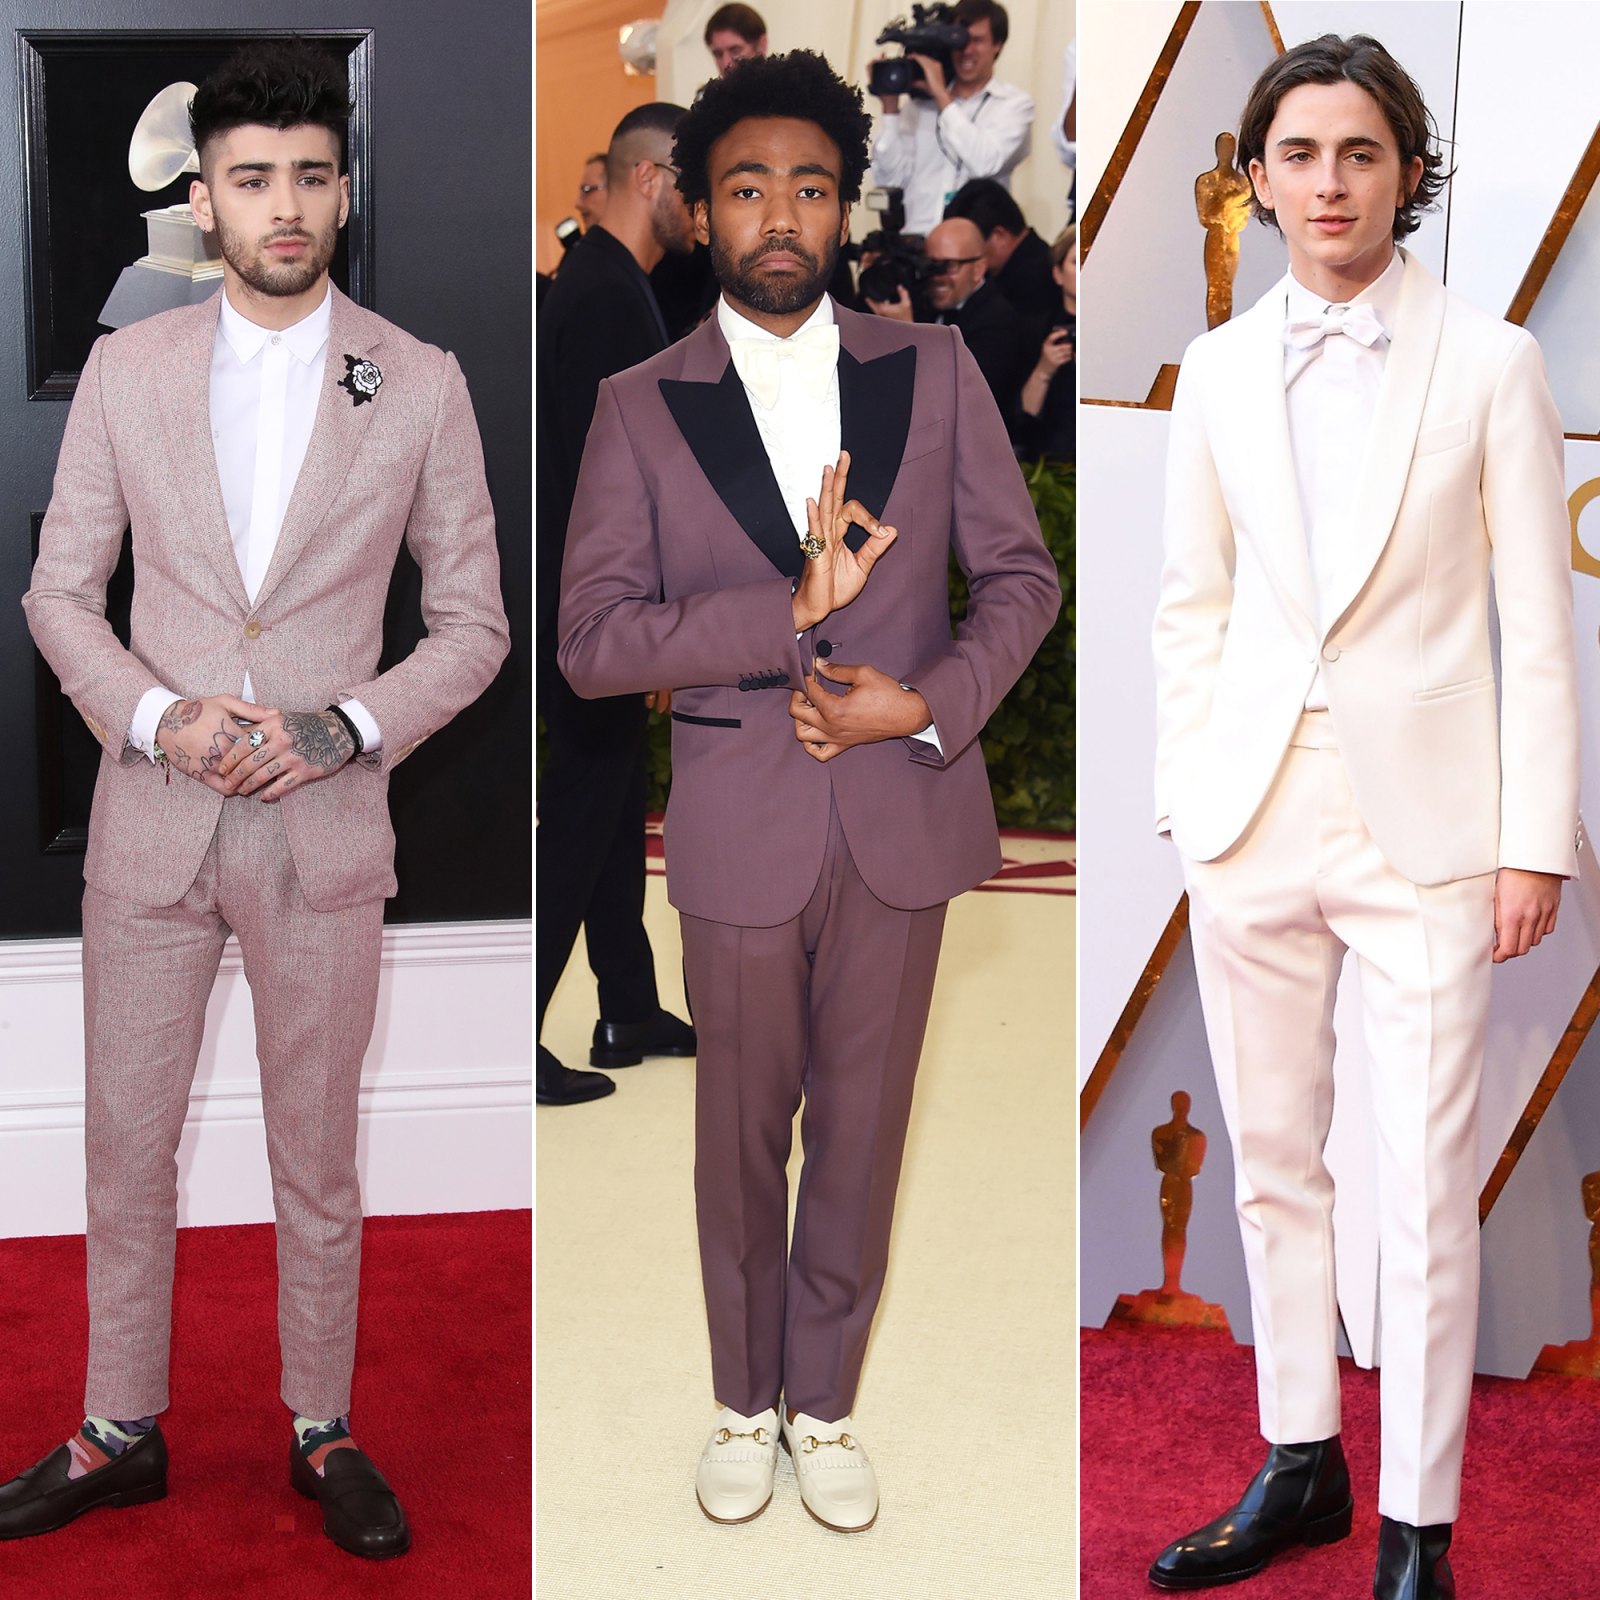 Hottest Guys in Suits - 2018 Edition